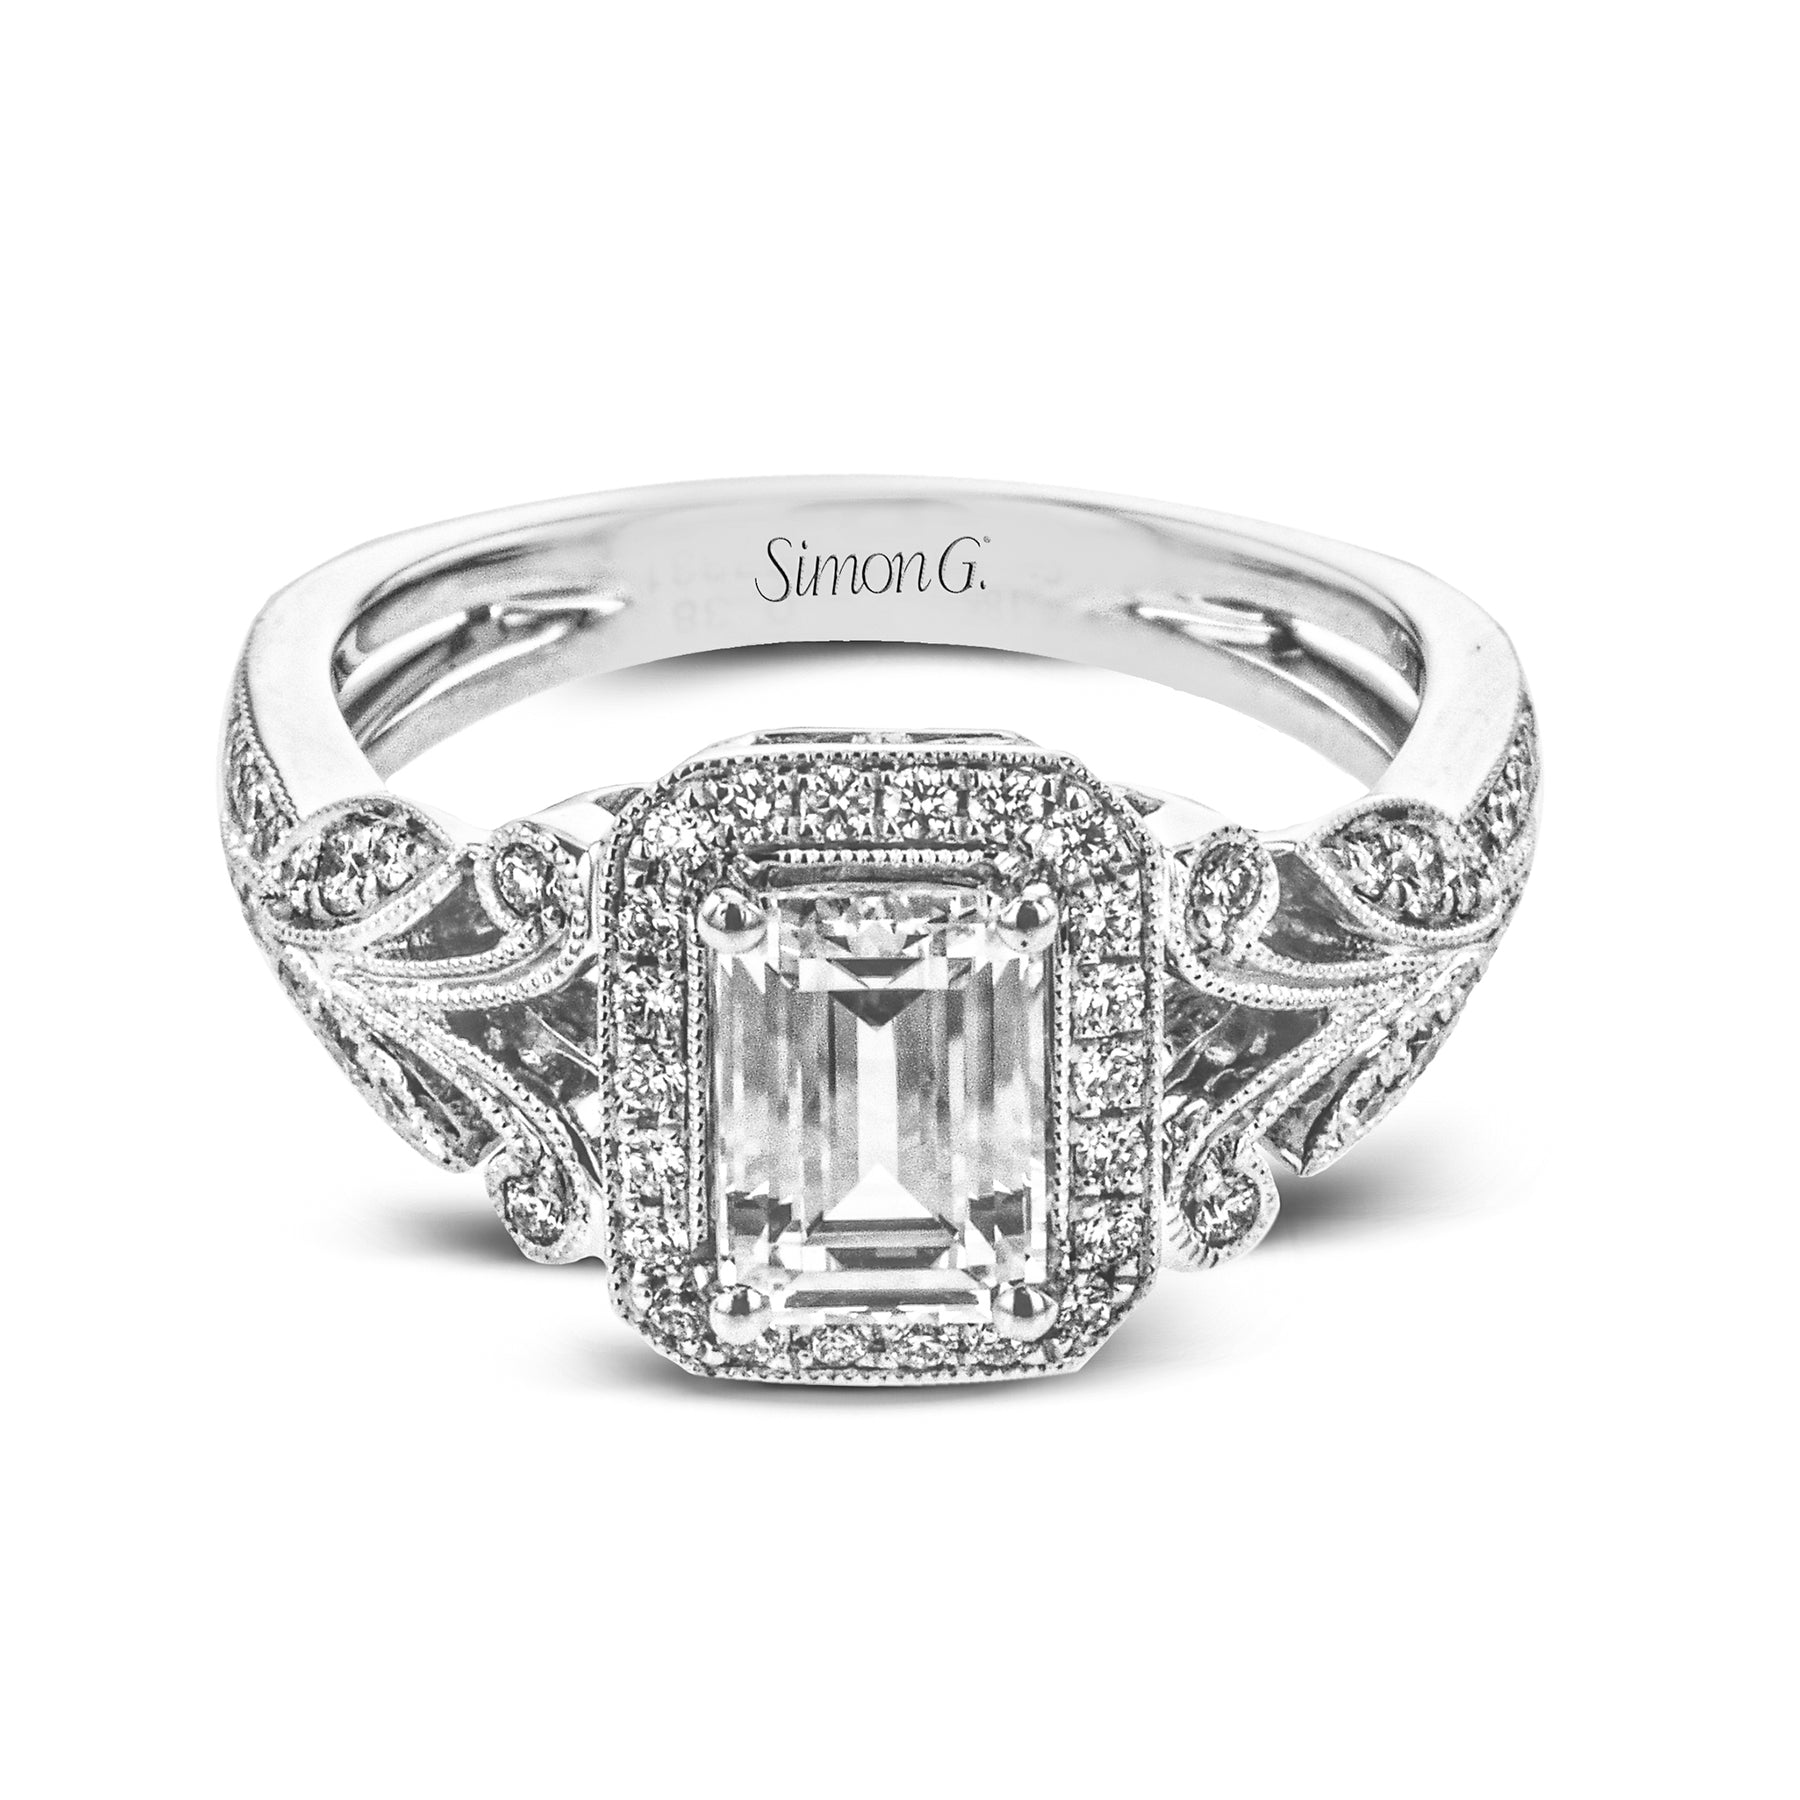 Emerald-Cut Halo Engagement Ring In 18k Gold With Diamonds TR629-EM